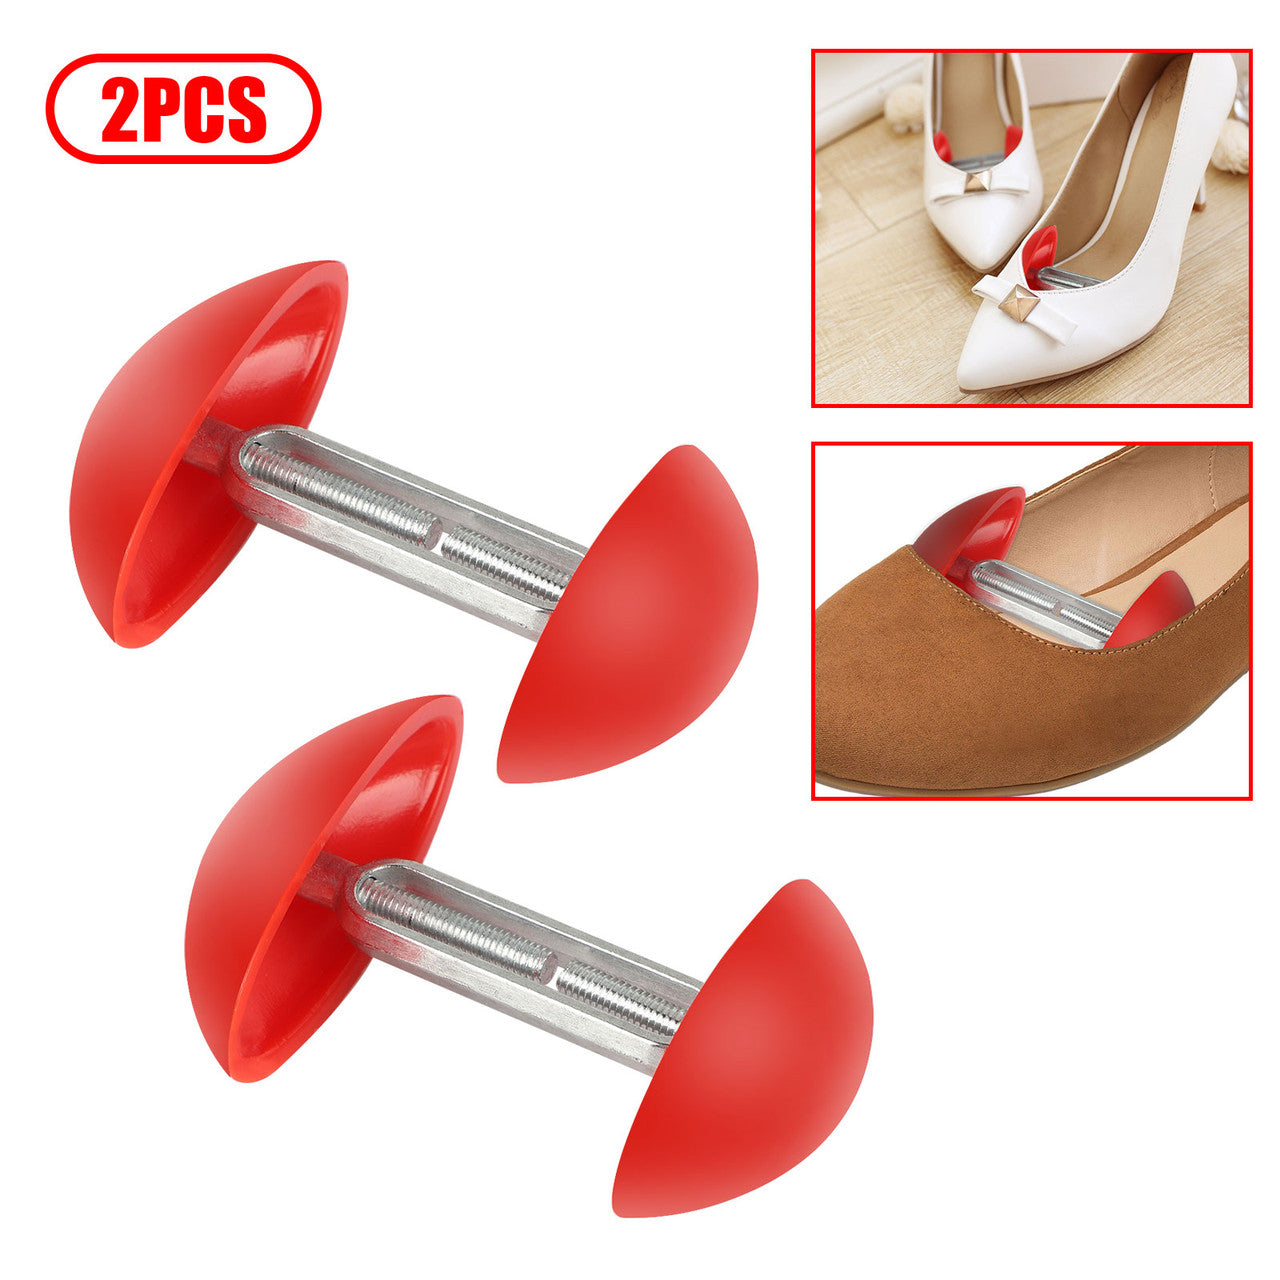 Shoes Stretchers, Women Men Shoe Width Extenders, Adjustable Mini Simple Plastic Shoe Tree High Heels Boots Stays Stereotypes Stretchers Shapes Expander Widener Help to Relief Pain, 2Pcs